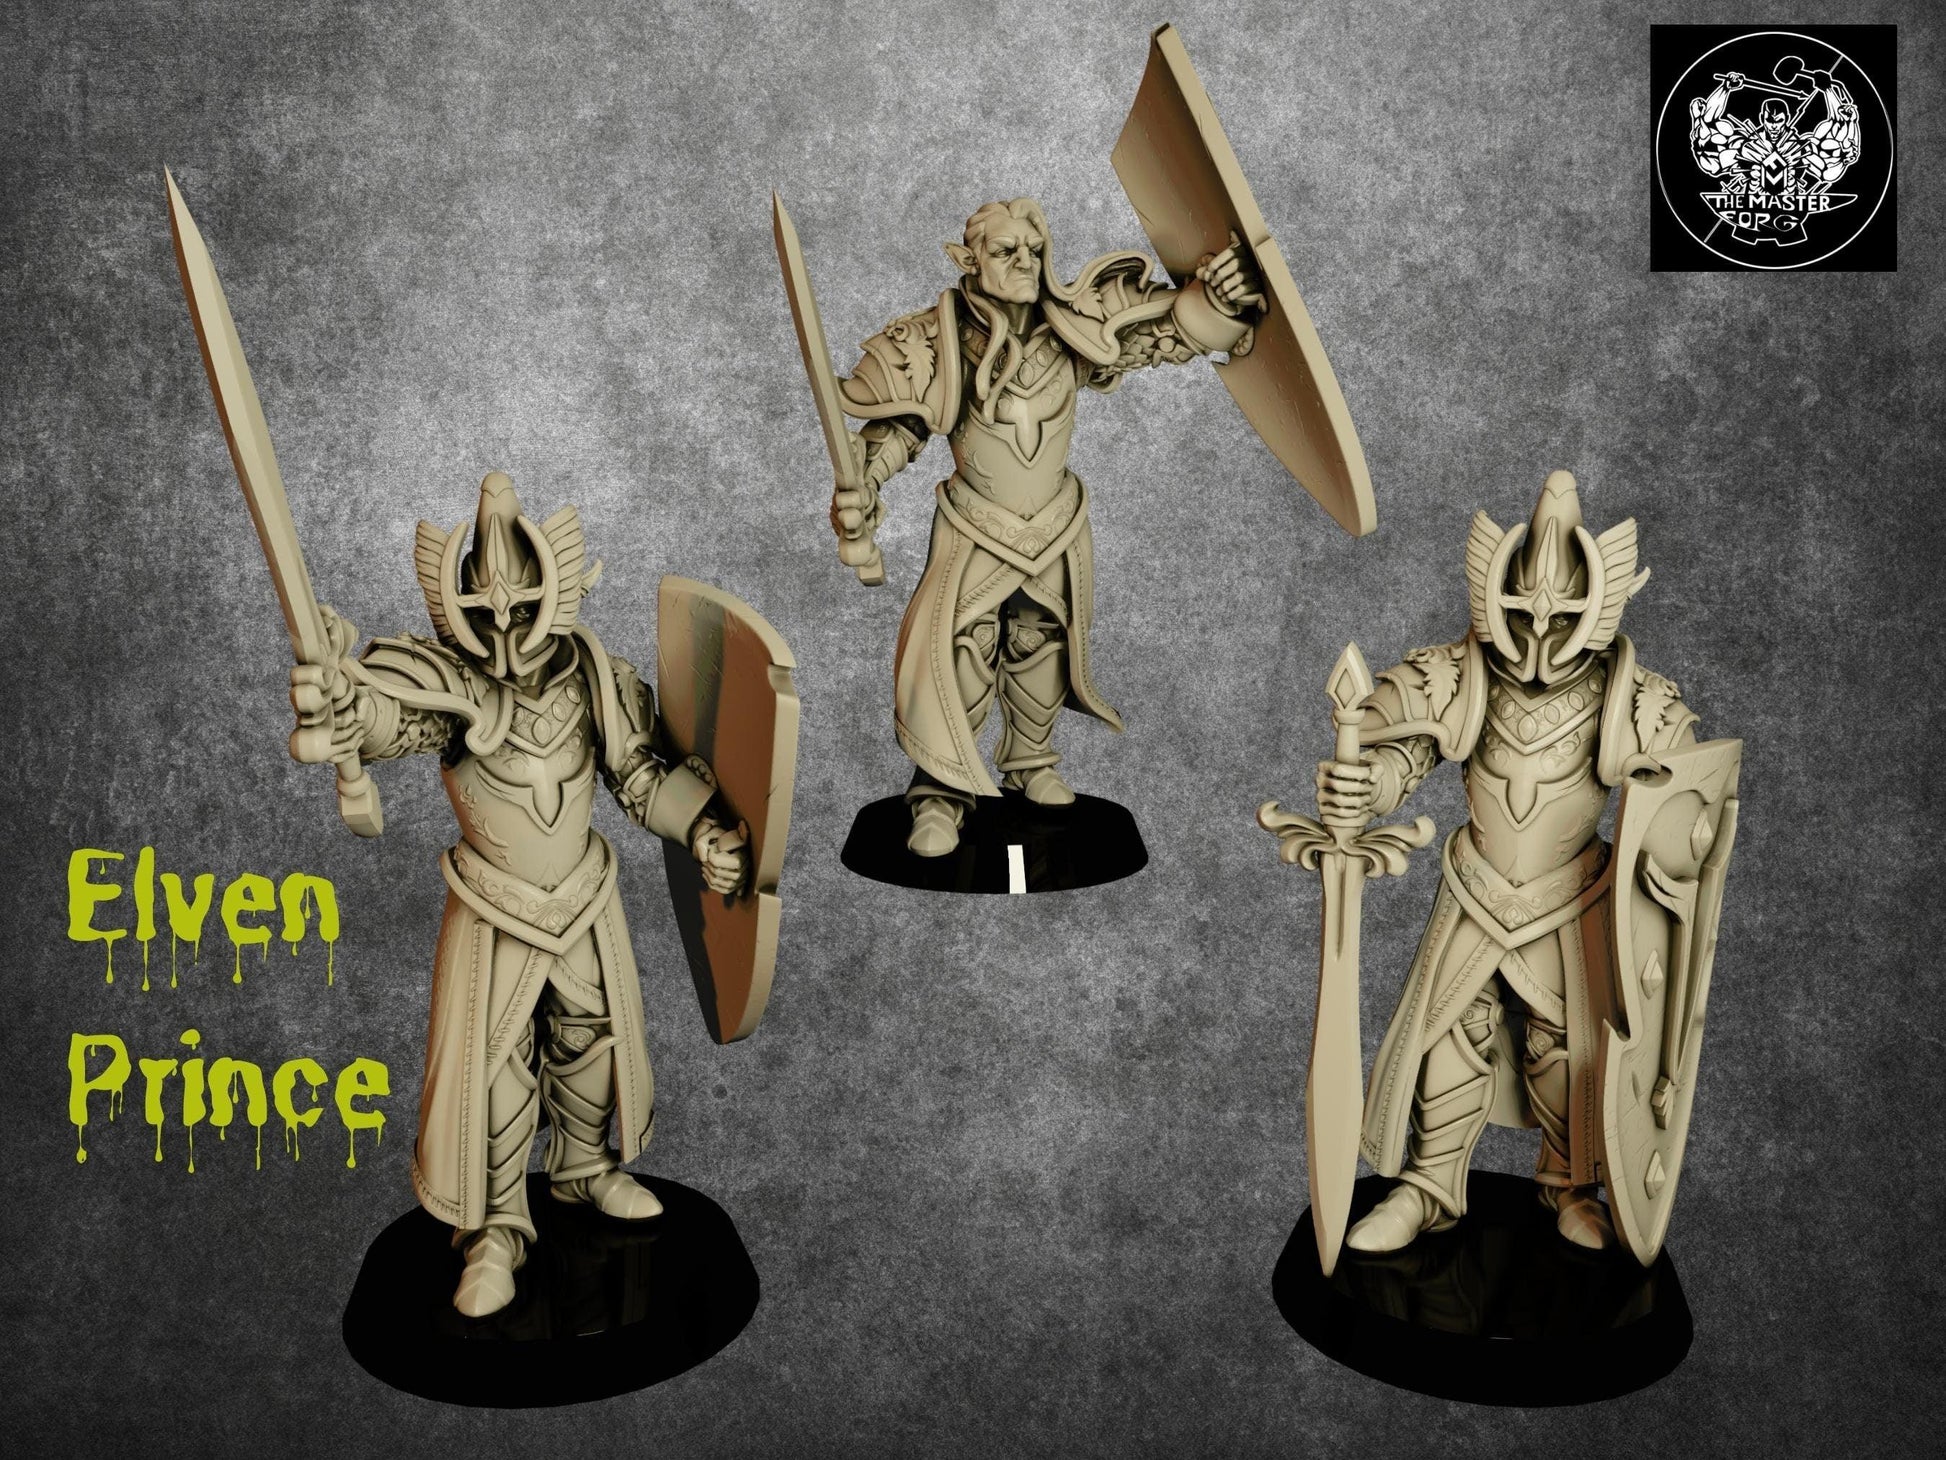 Elf Prince boss miniature - 32mm scale Tabletop gaming DnD Miniature Dungeons and Dragons elf warrior paladin miniature - Plague Miniatures shop for DnD Miniatures